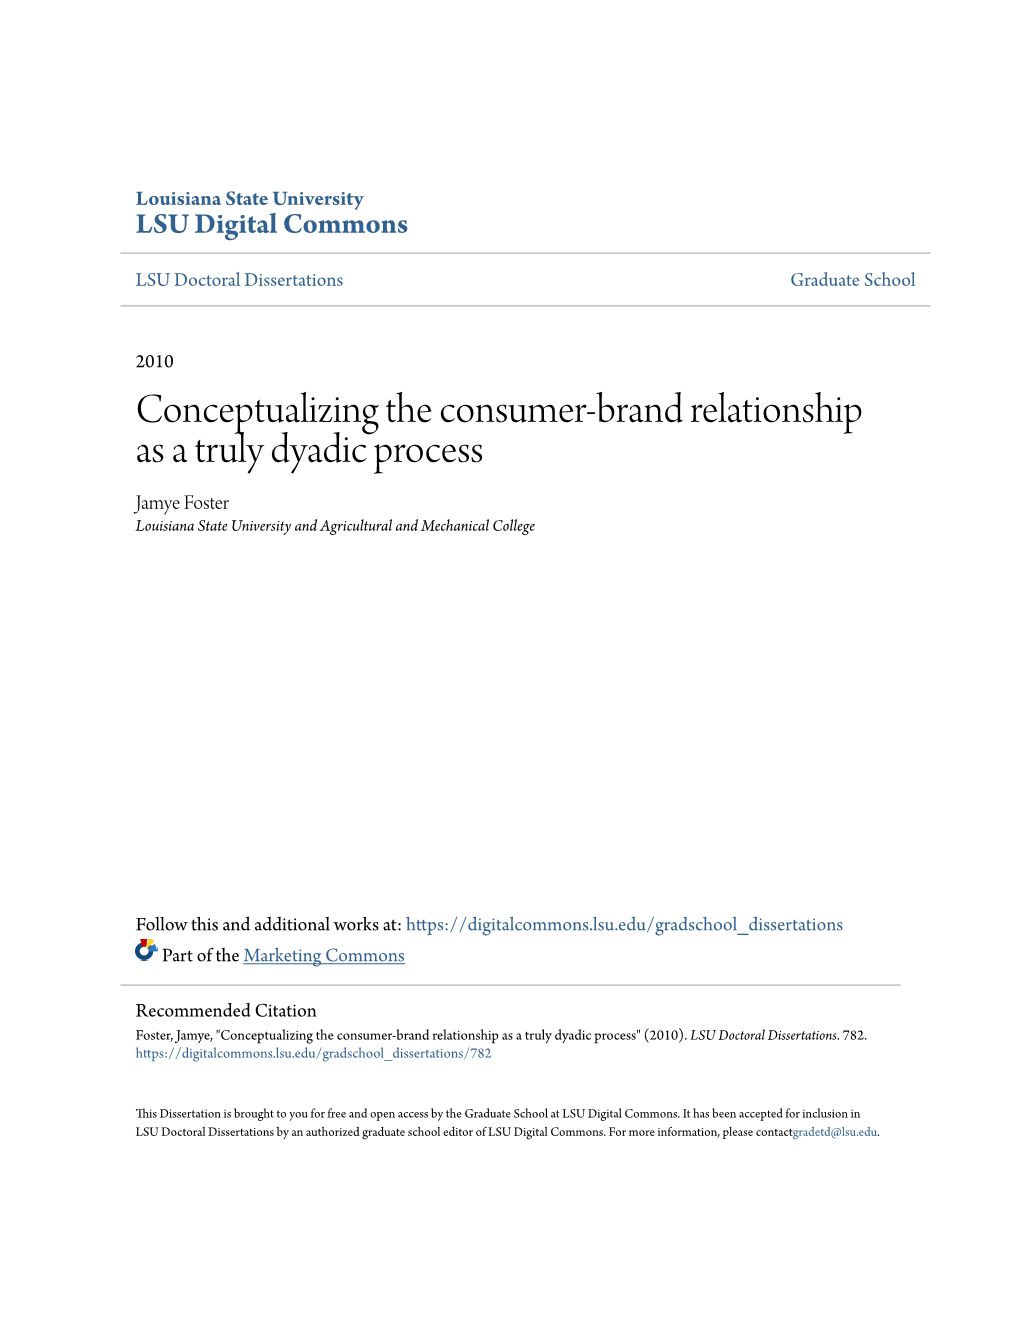 Conceptualizing the Consumer-Brand Relationship As a Truly Dyadic Process Jamye Foster Louisiana State University and Agricultural and Mechanical College